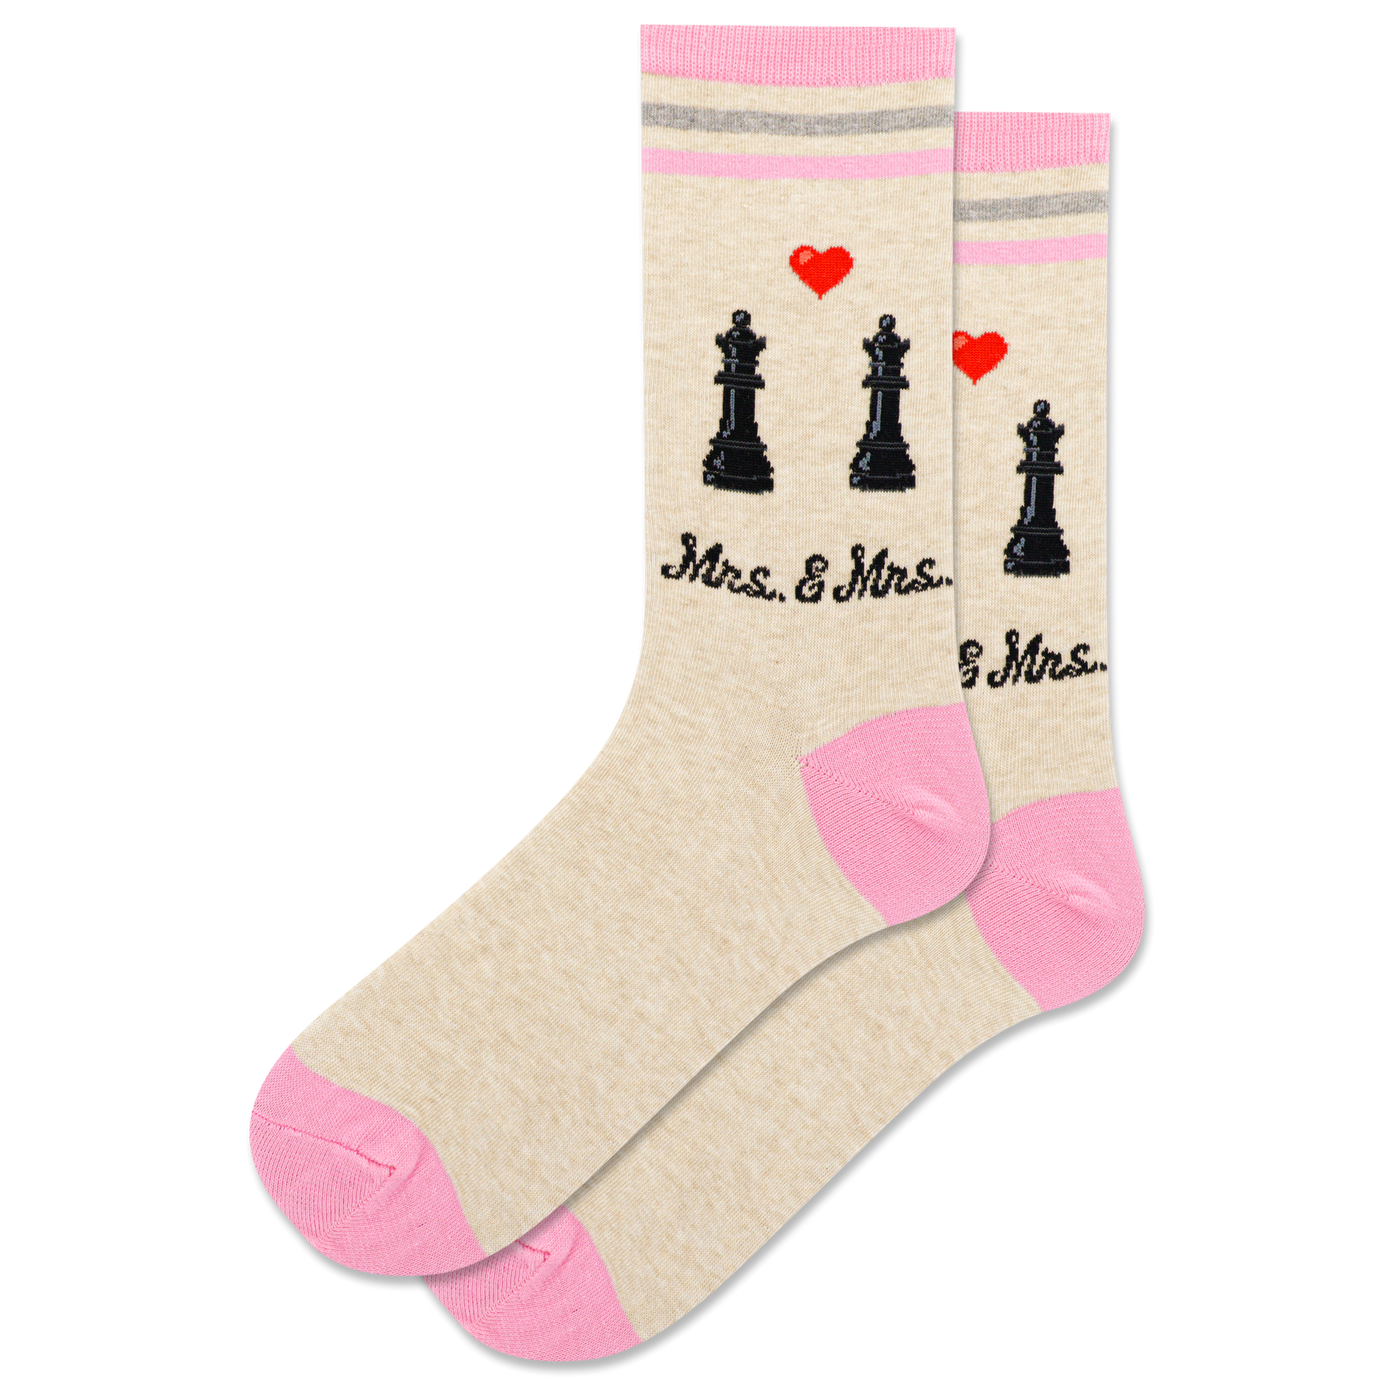 "Mrs. and Mrs." Cotton Crew Socks by Hot Sox